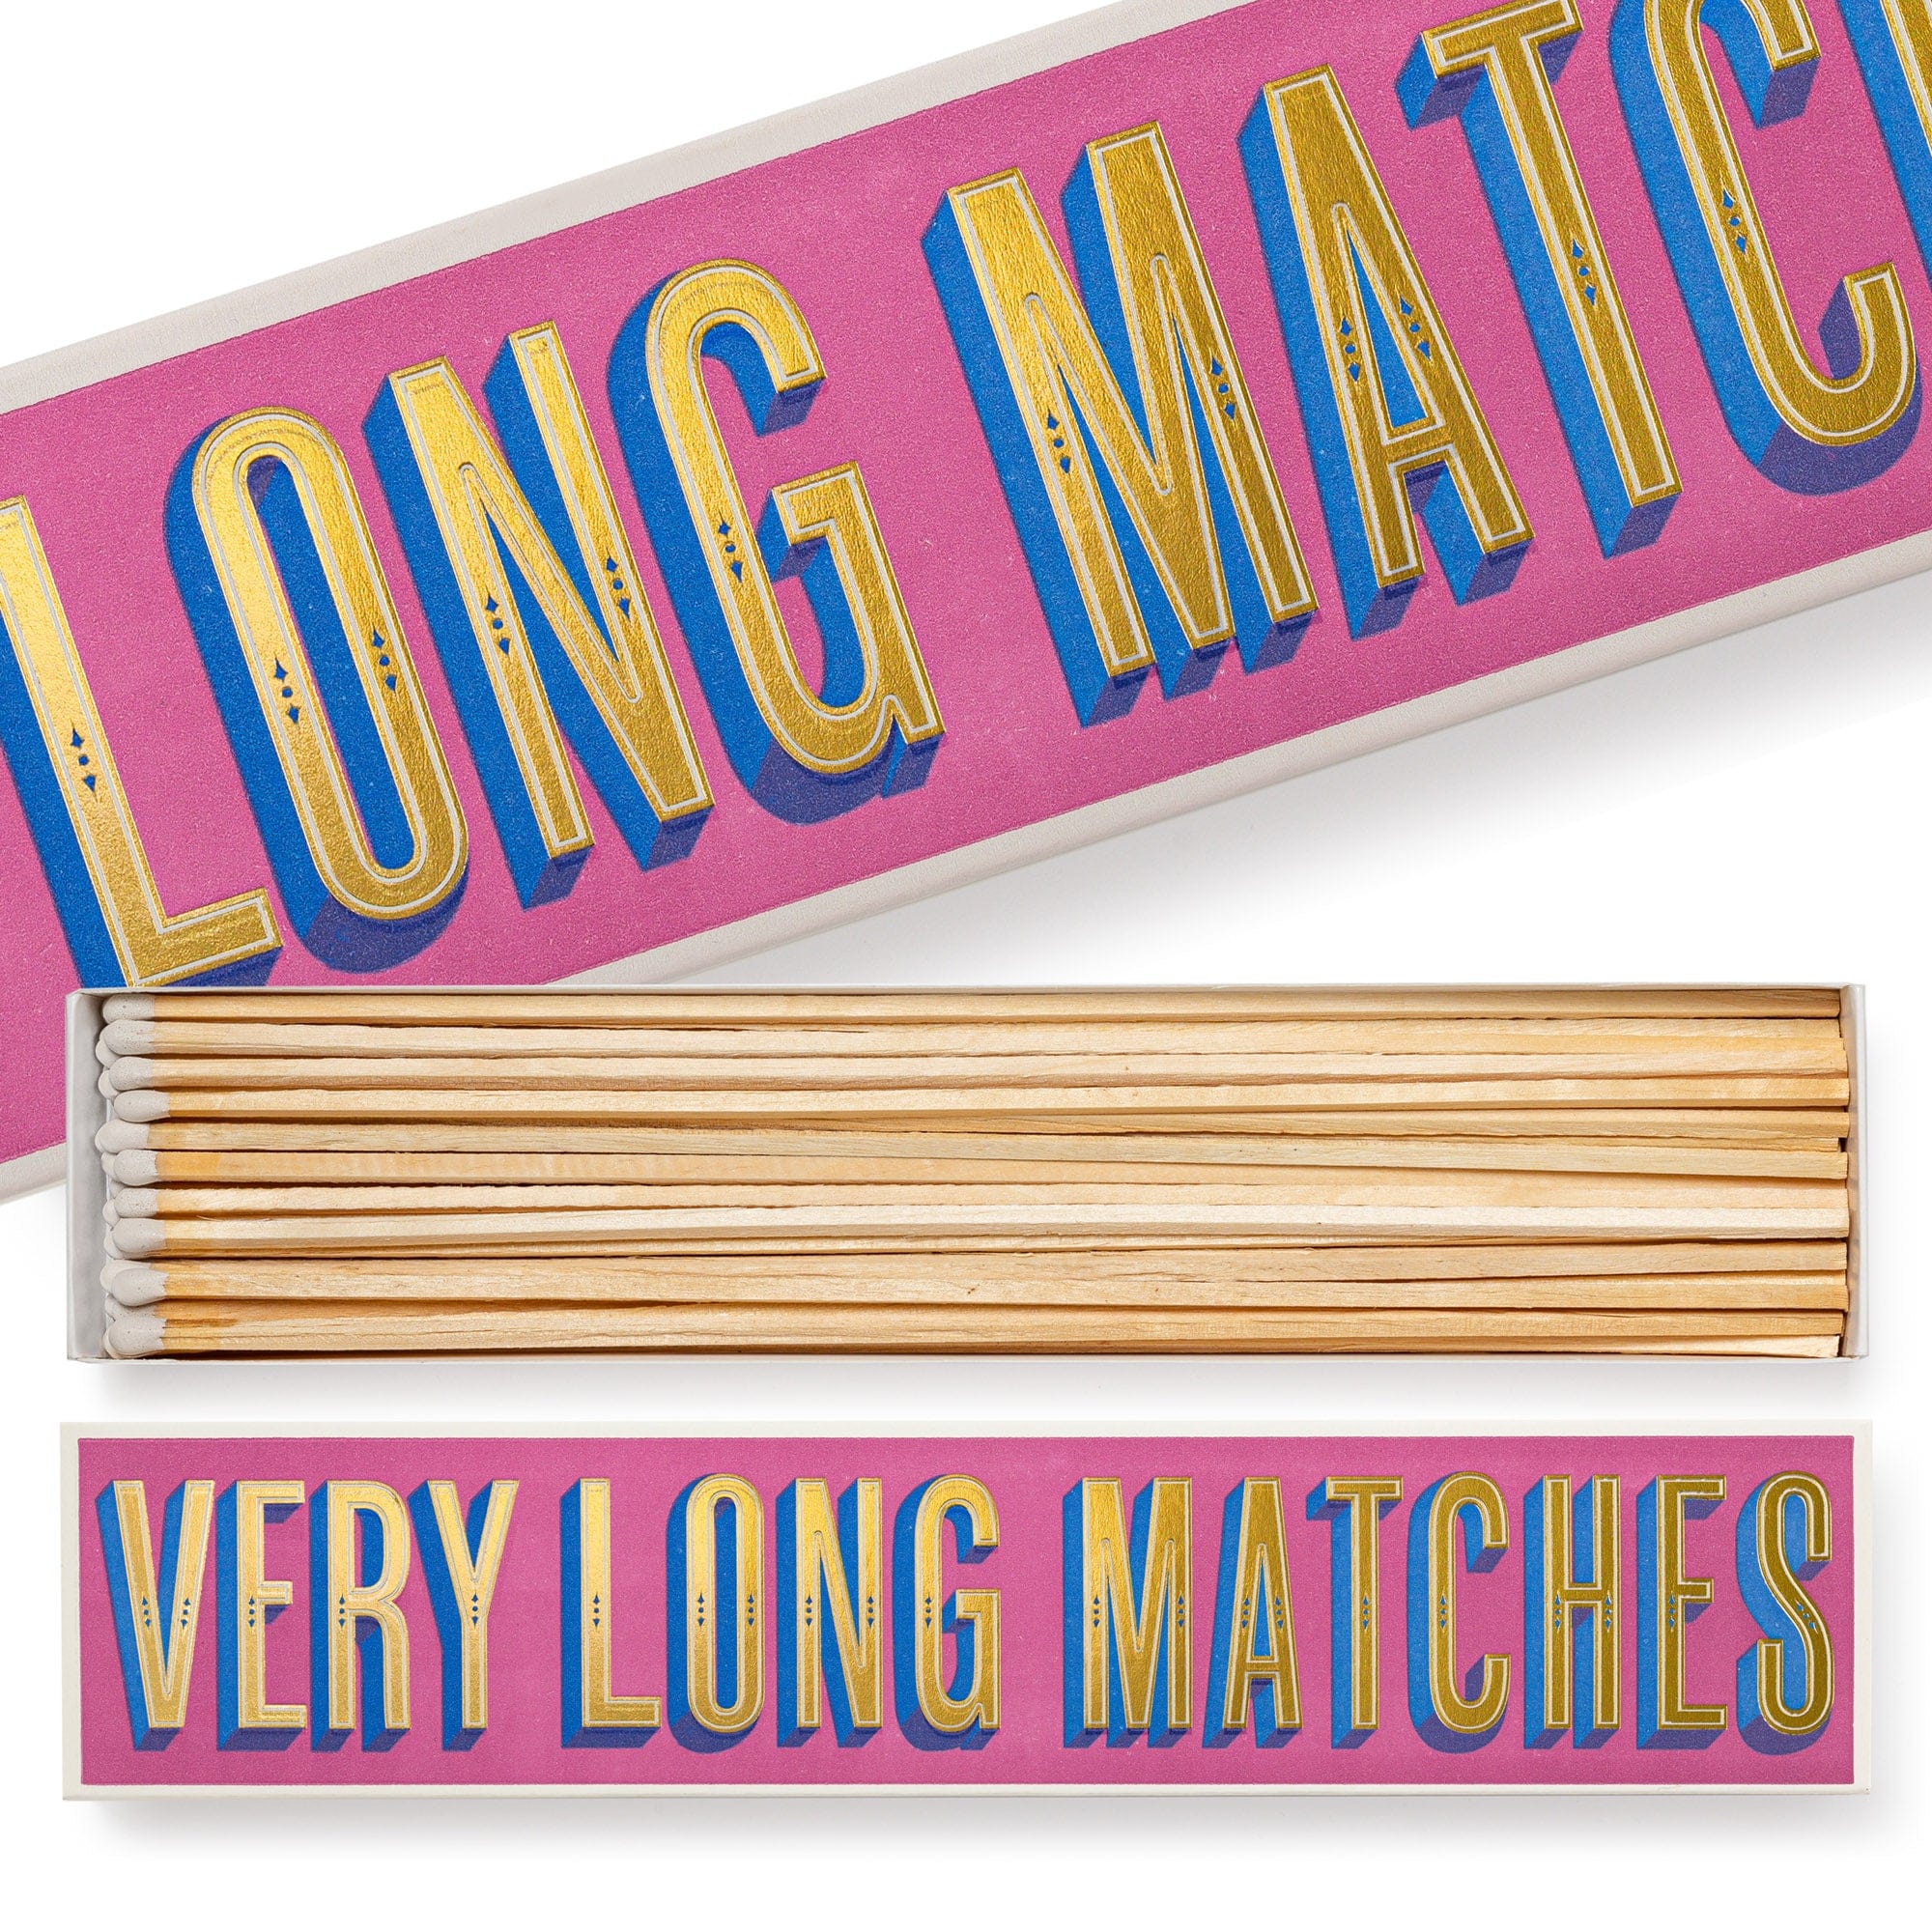 Extra Long Luxury Matches Very Long Matches